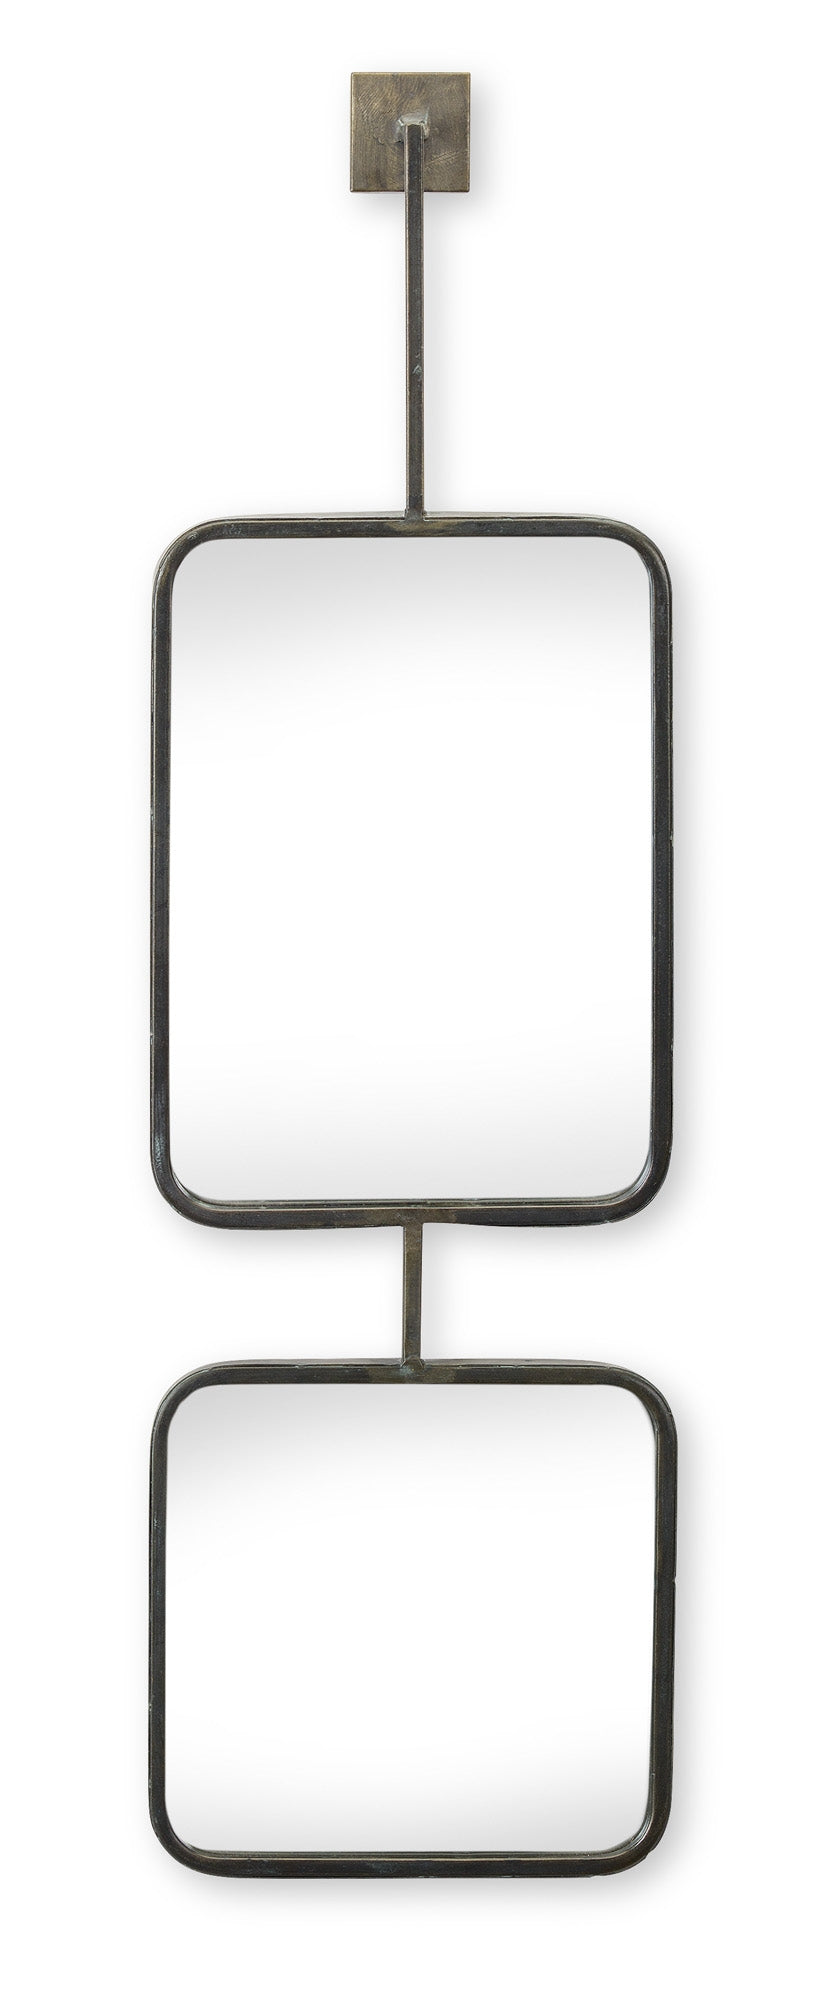 double decorative hanging metal mirror on a white background